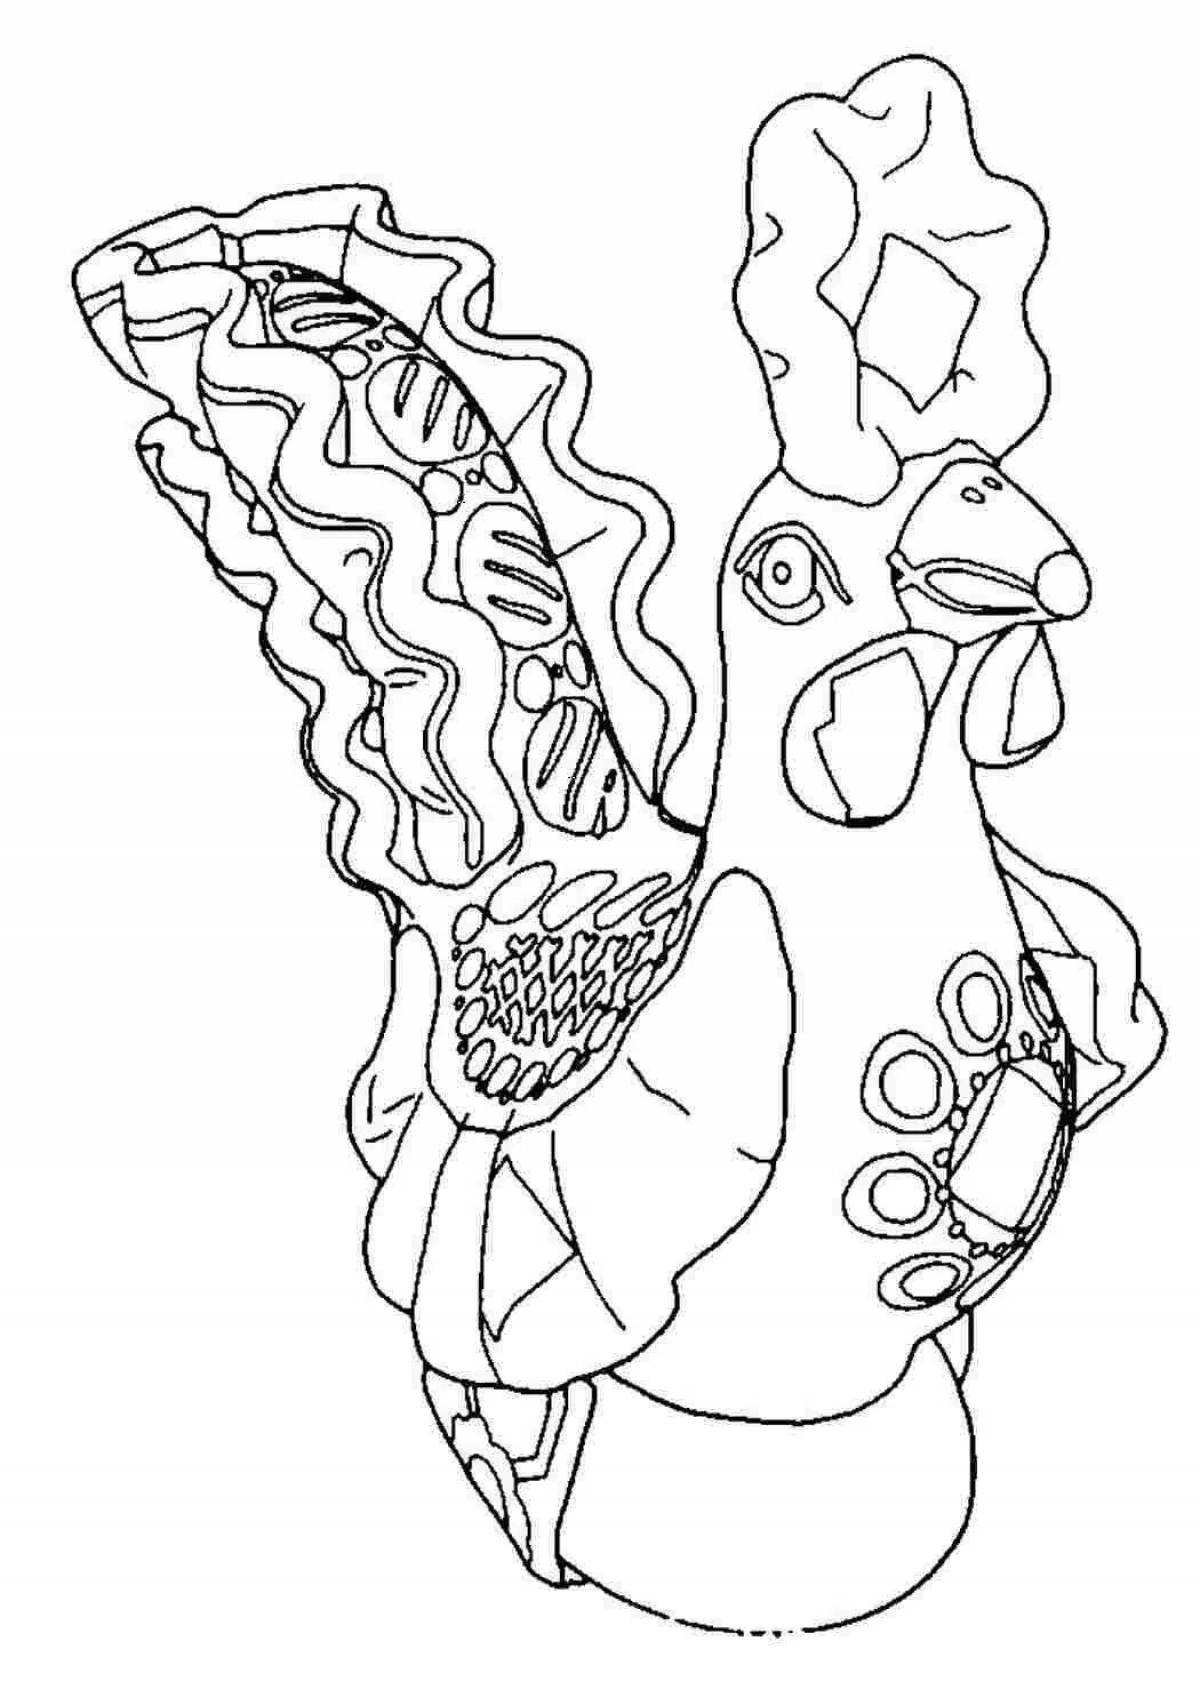 Coloring page playful Dymkovo birds